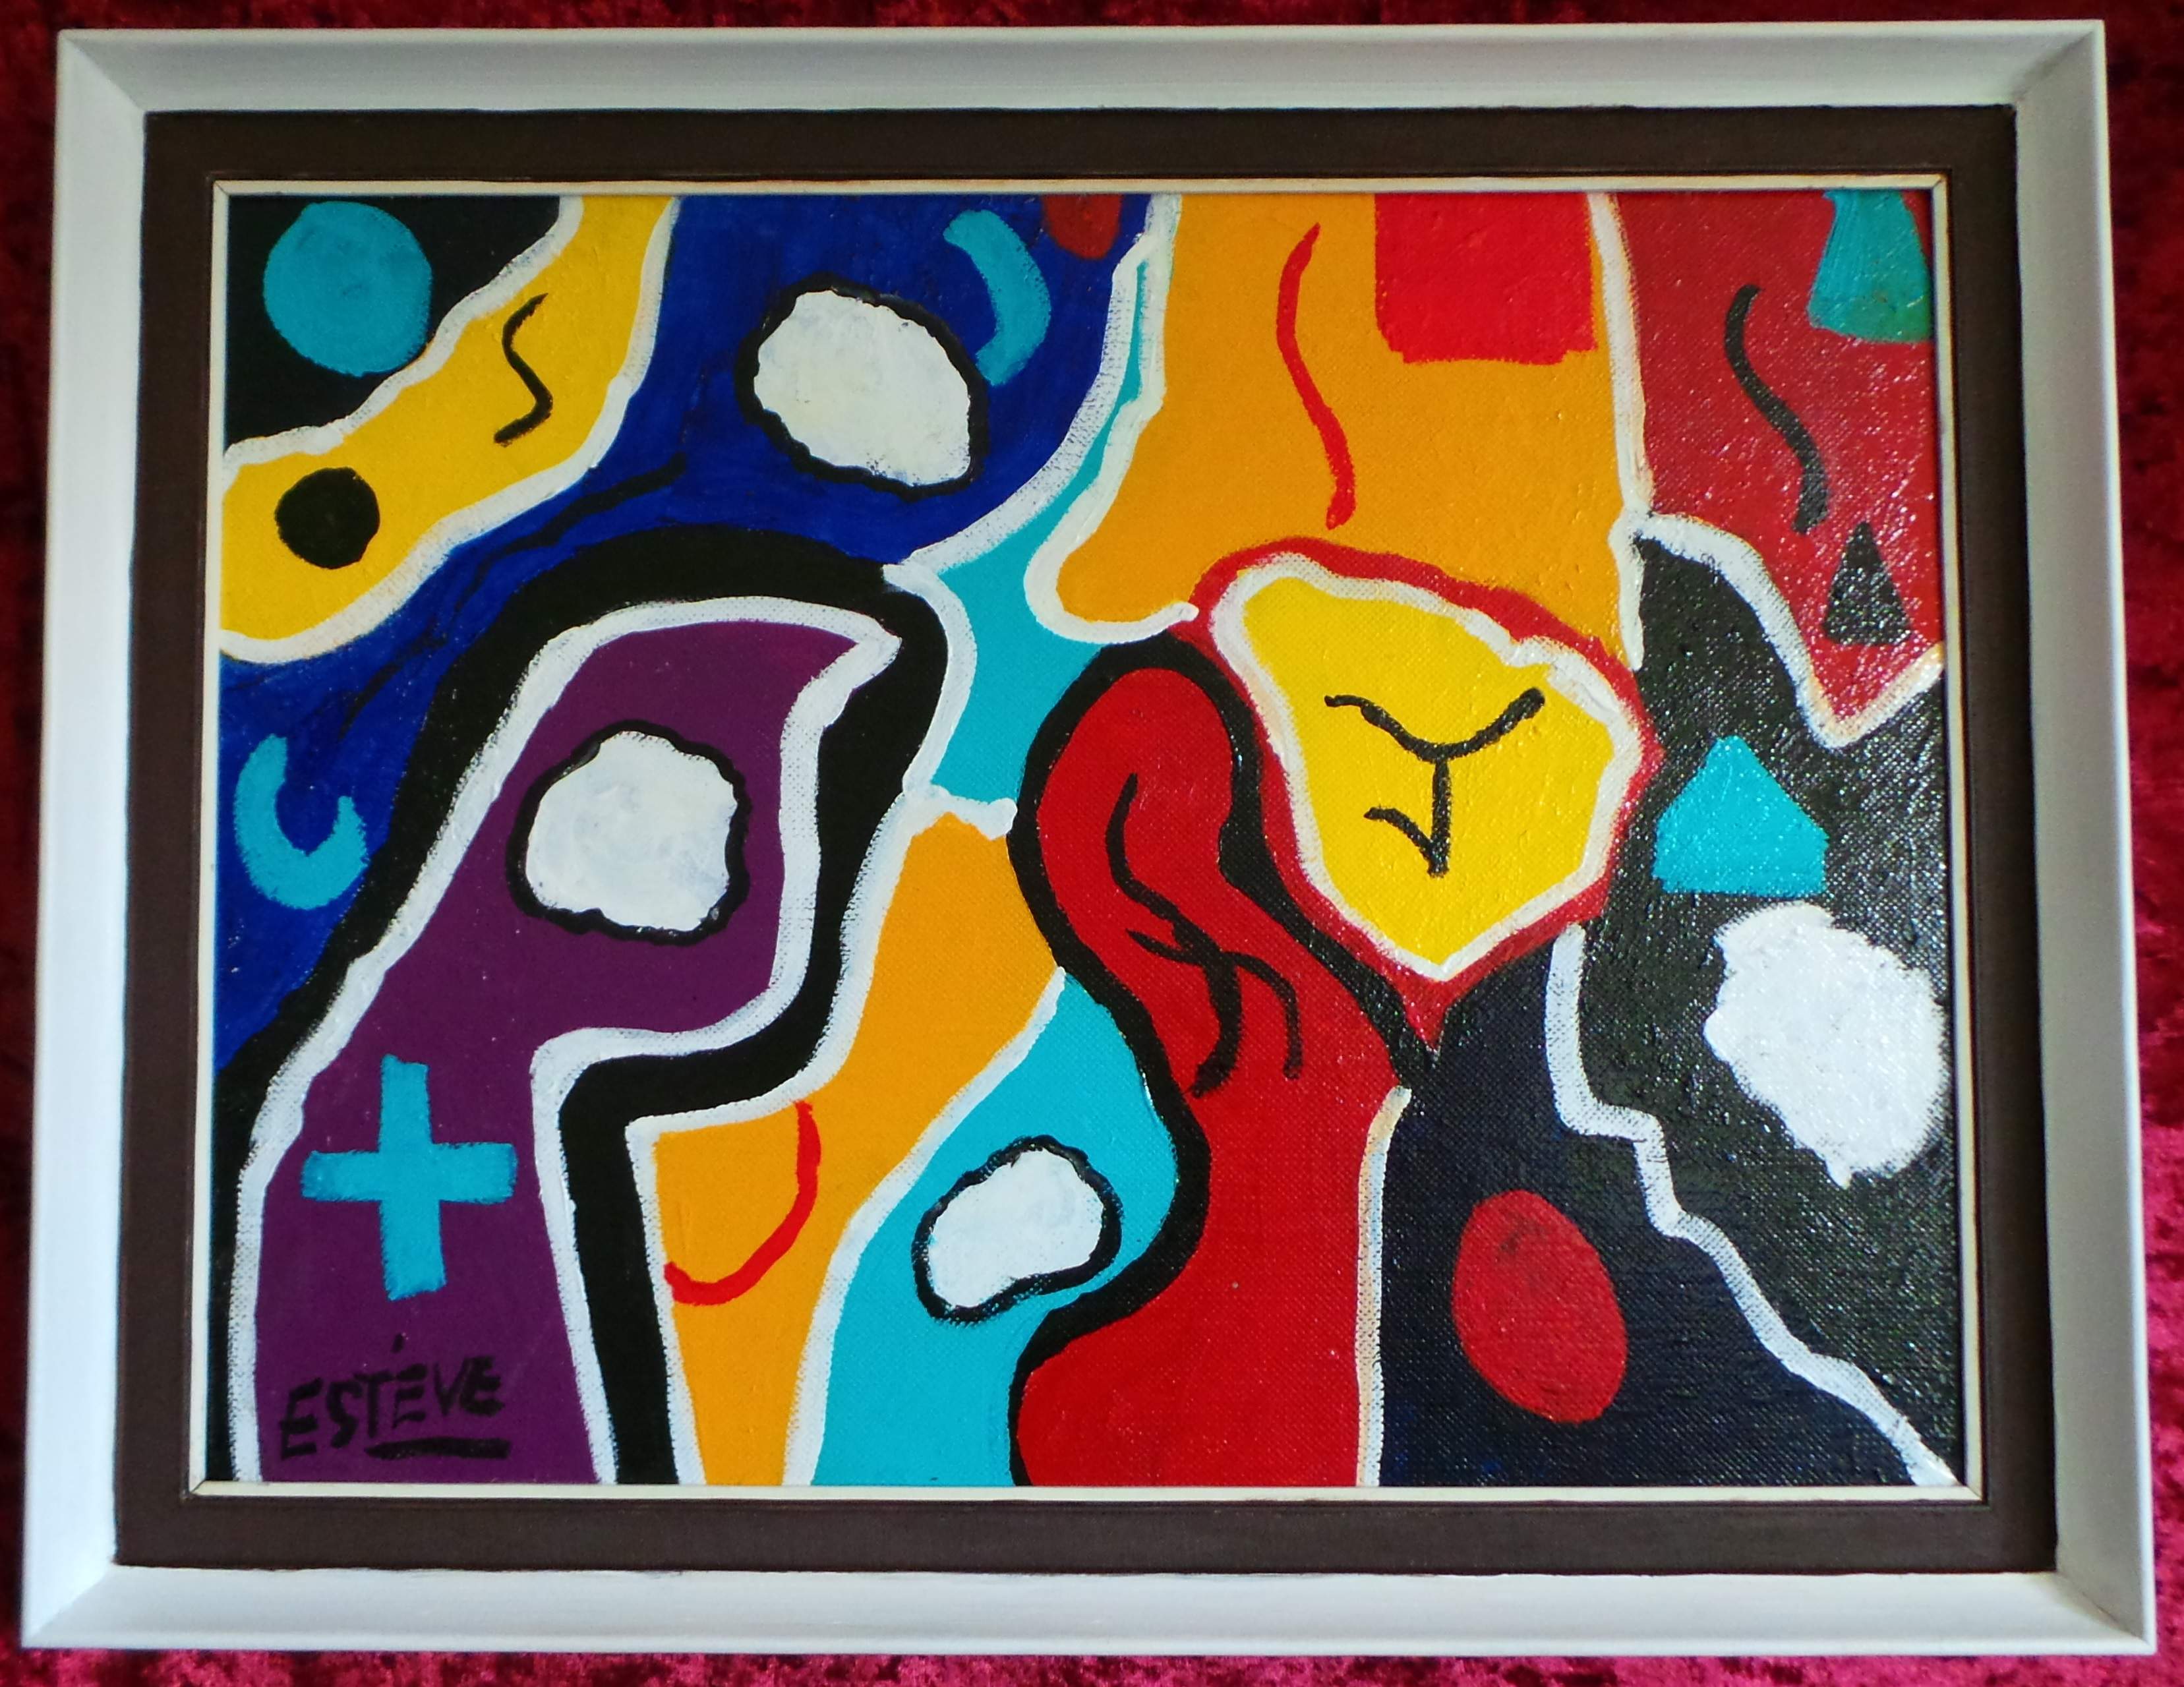 ABSTRACT OIL PAINTING IN STYLE OF MAURICE ESTEVE.